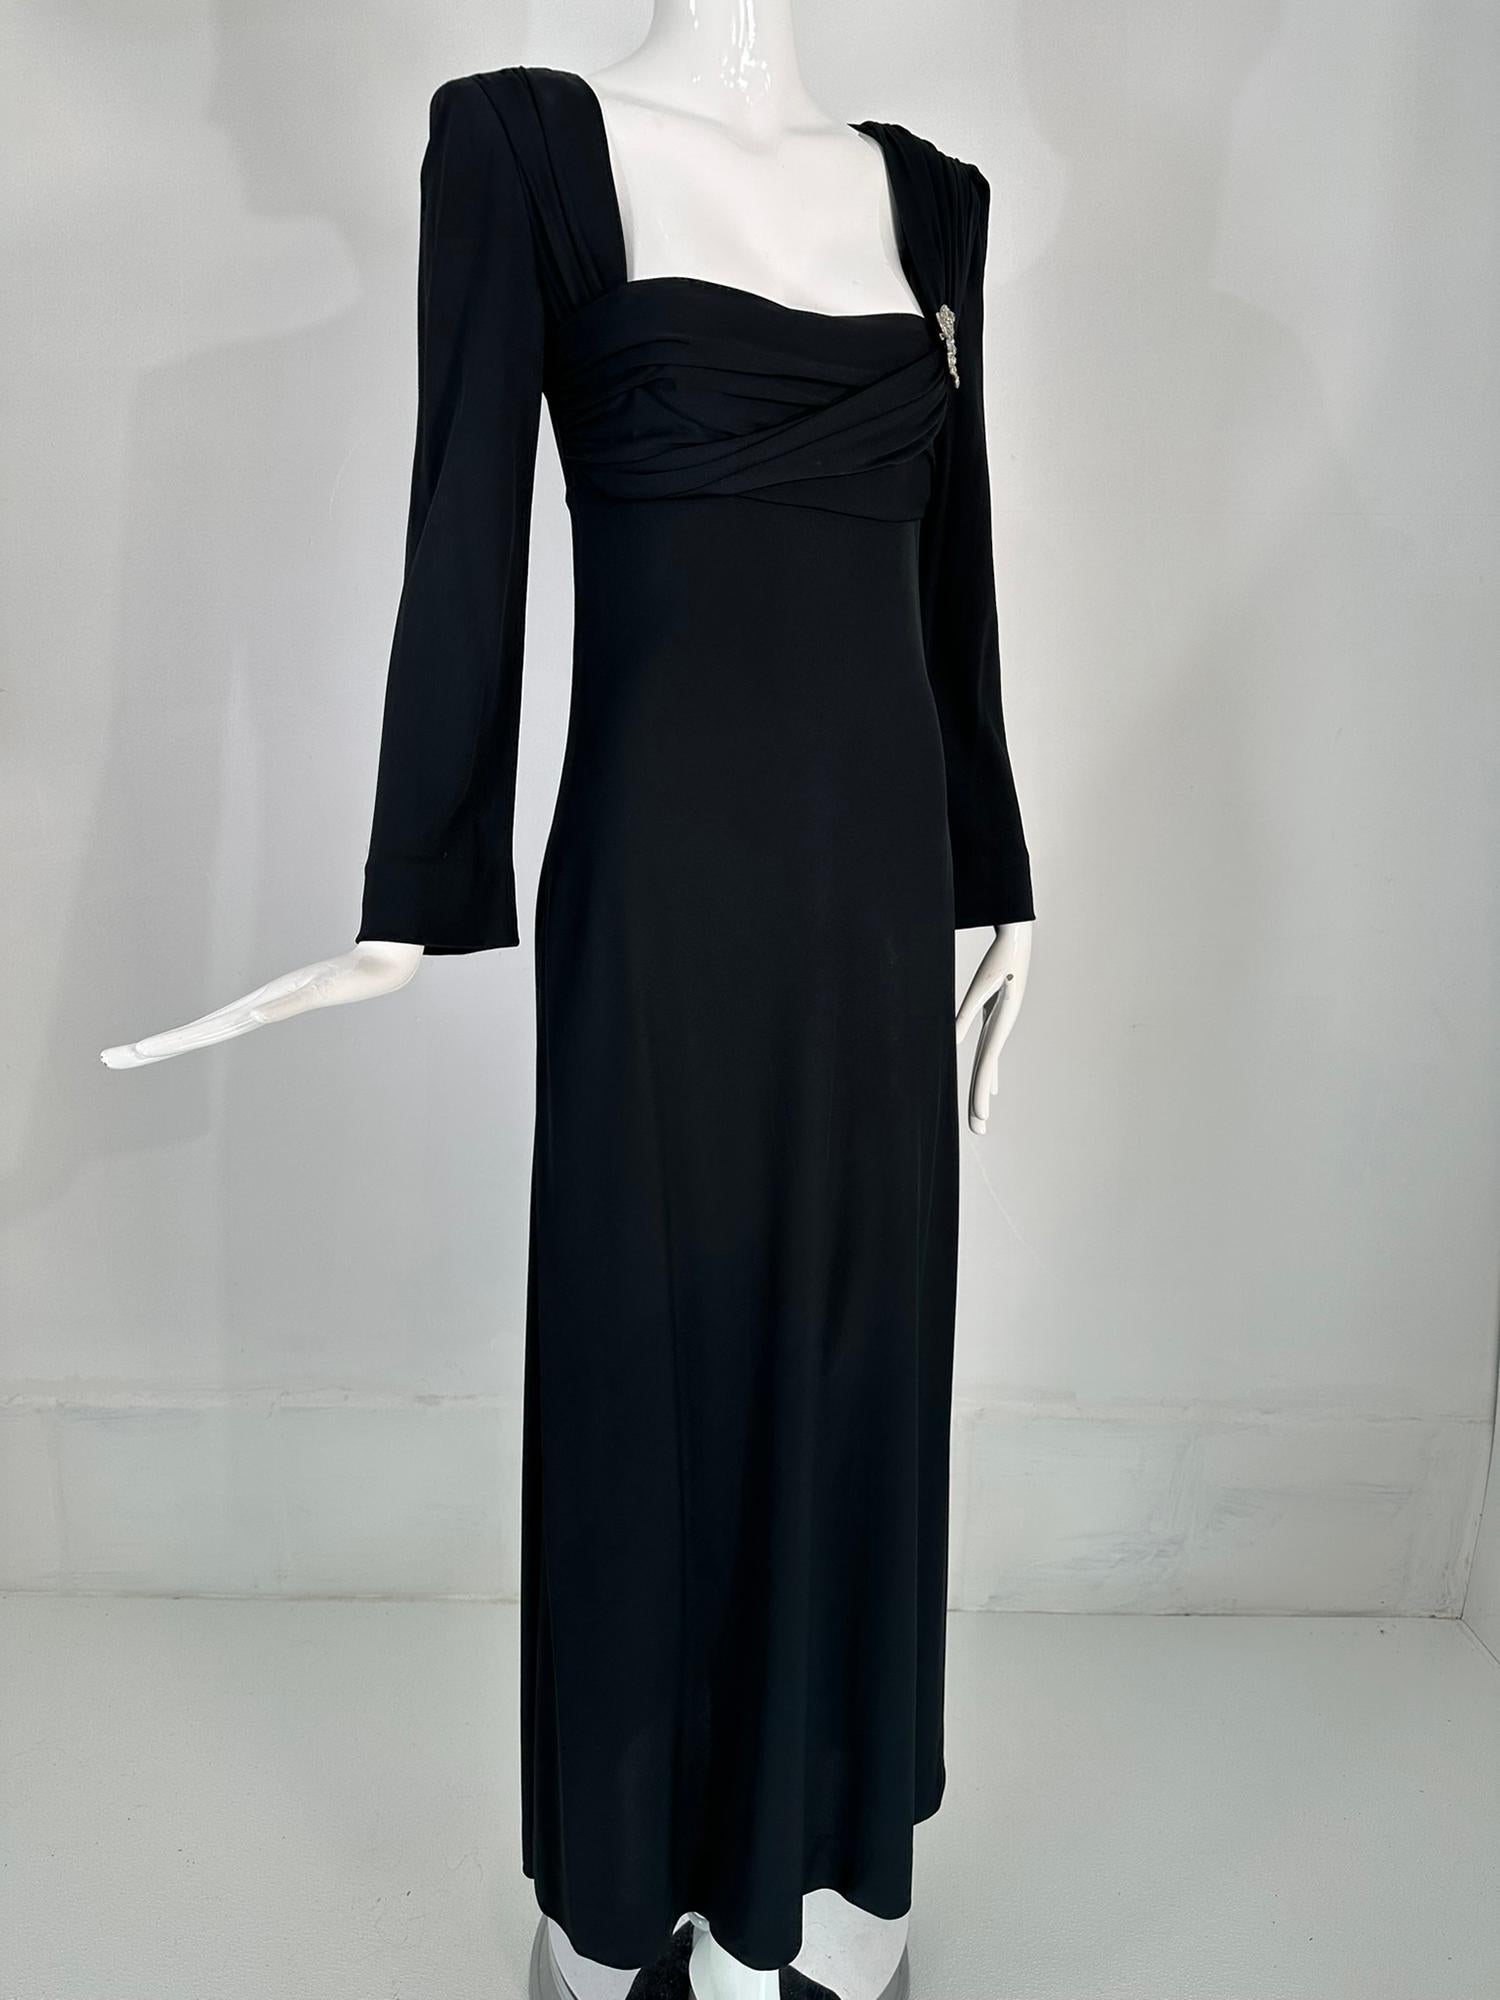  Early 1940s Custom made, old Hollywood silky black Jersey gown with shoulder drape. Couture quality, this gown is sleek & modern the fabric is a weighty matte jersey that drapes beautifully. Low and wide square front neckline dress with a high